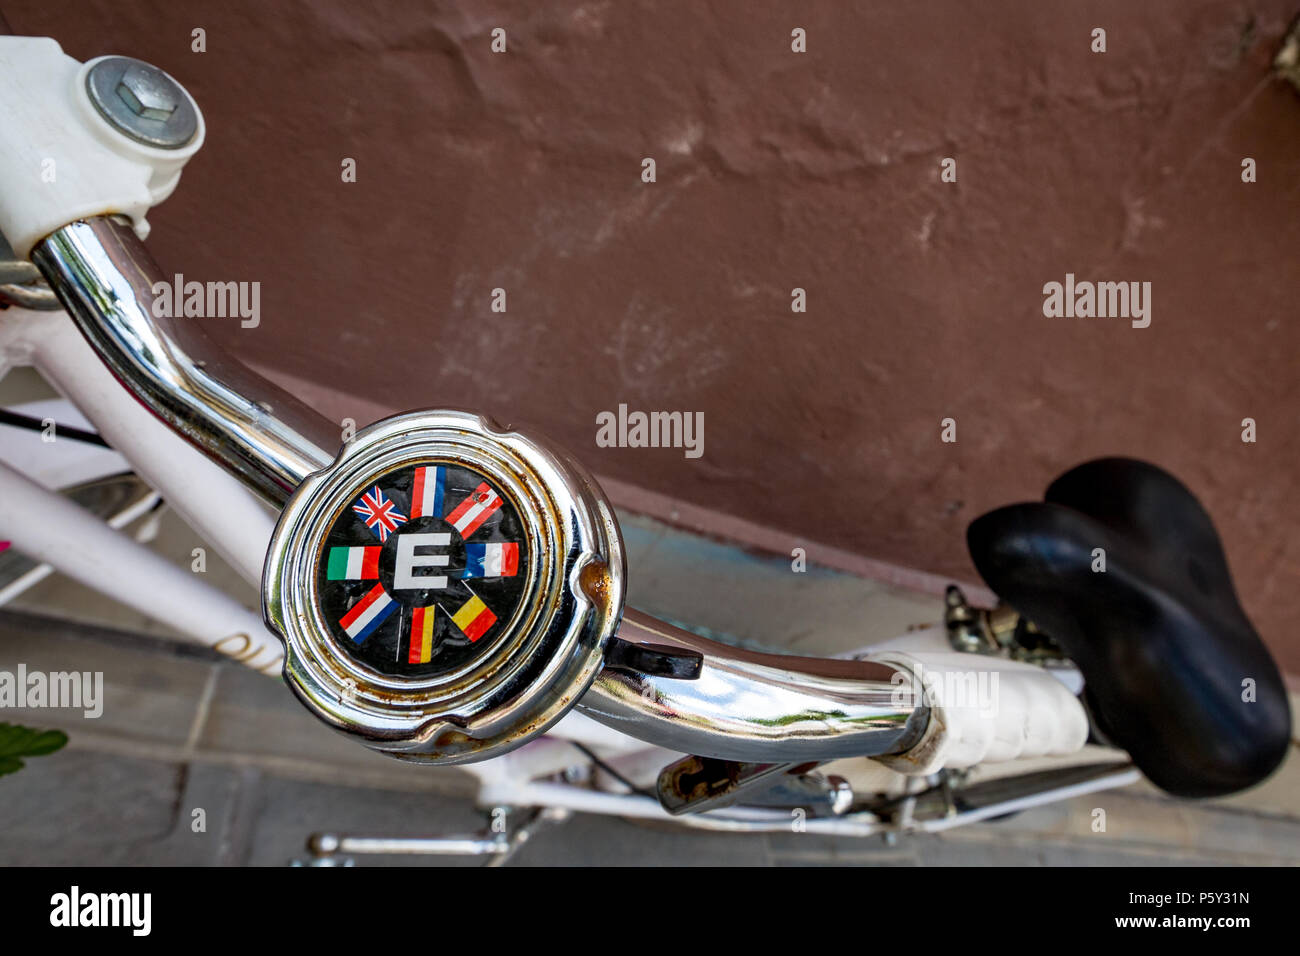 LJUBLJANA, SLOVENIA - JUNE 3, 2014: Metallic bicycle rusty bell with letter E for Europe and flags of eight European countries stands abandoned to rus Stock Photo